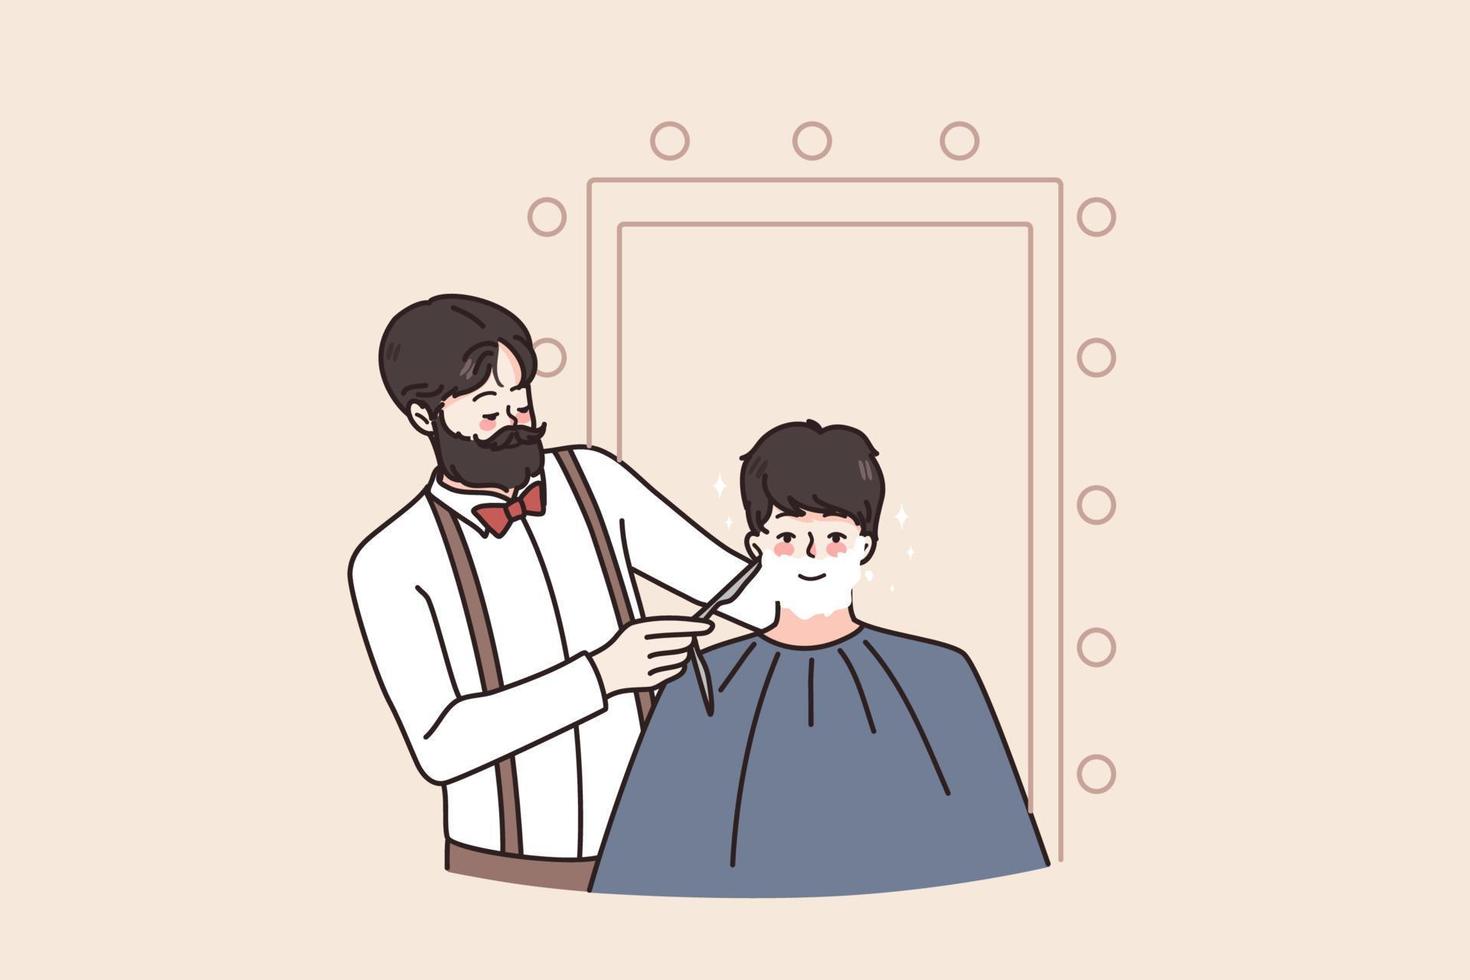 Man client get shaved in salon by hipster barber specialist. Smiling Caucasian guy have beard trimmed in barbershop or saloon. Male beauty procedures and hair care. Flat vector illustration.